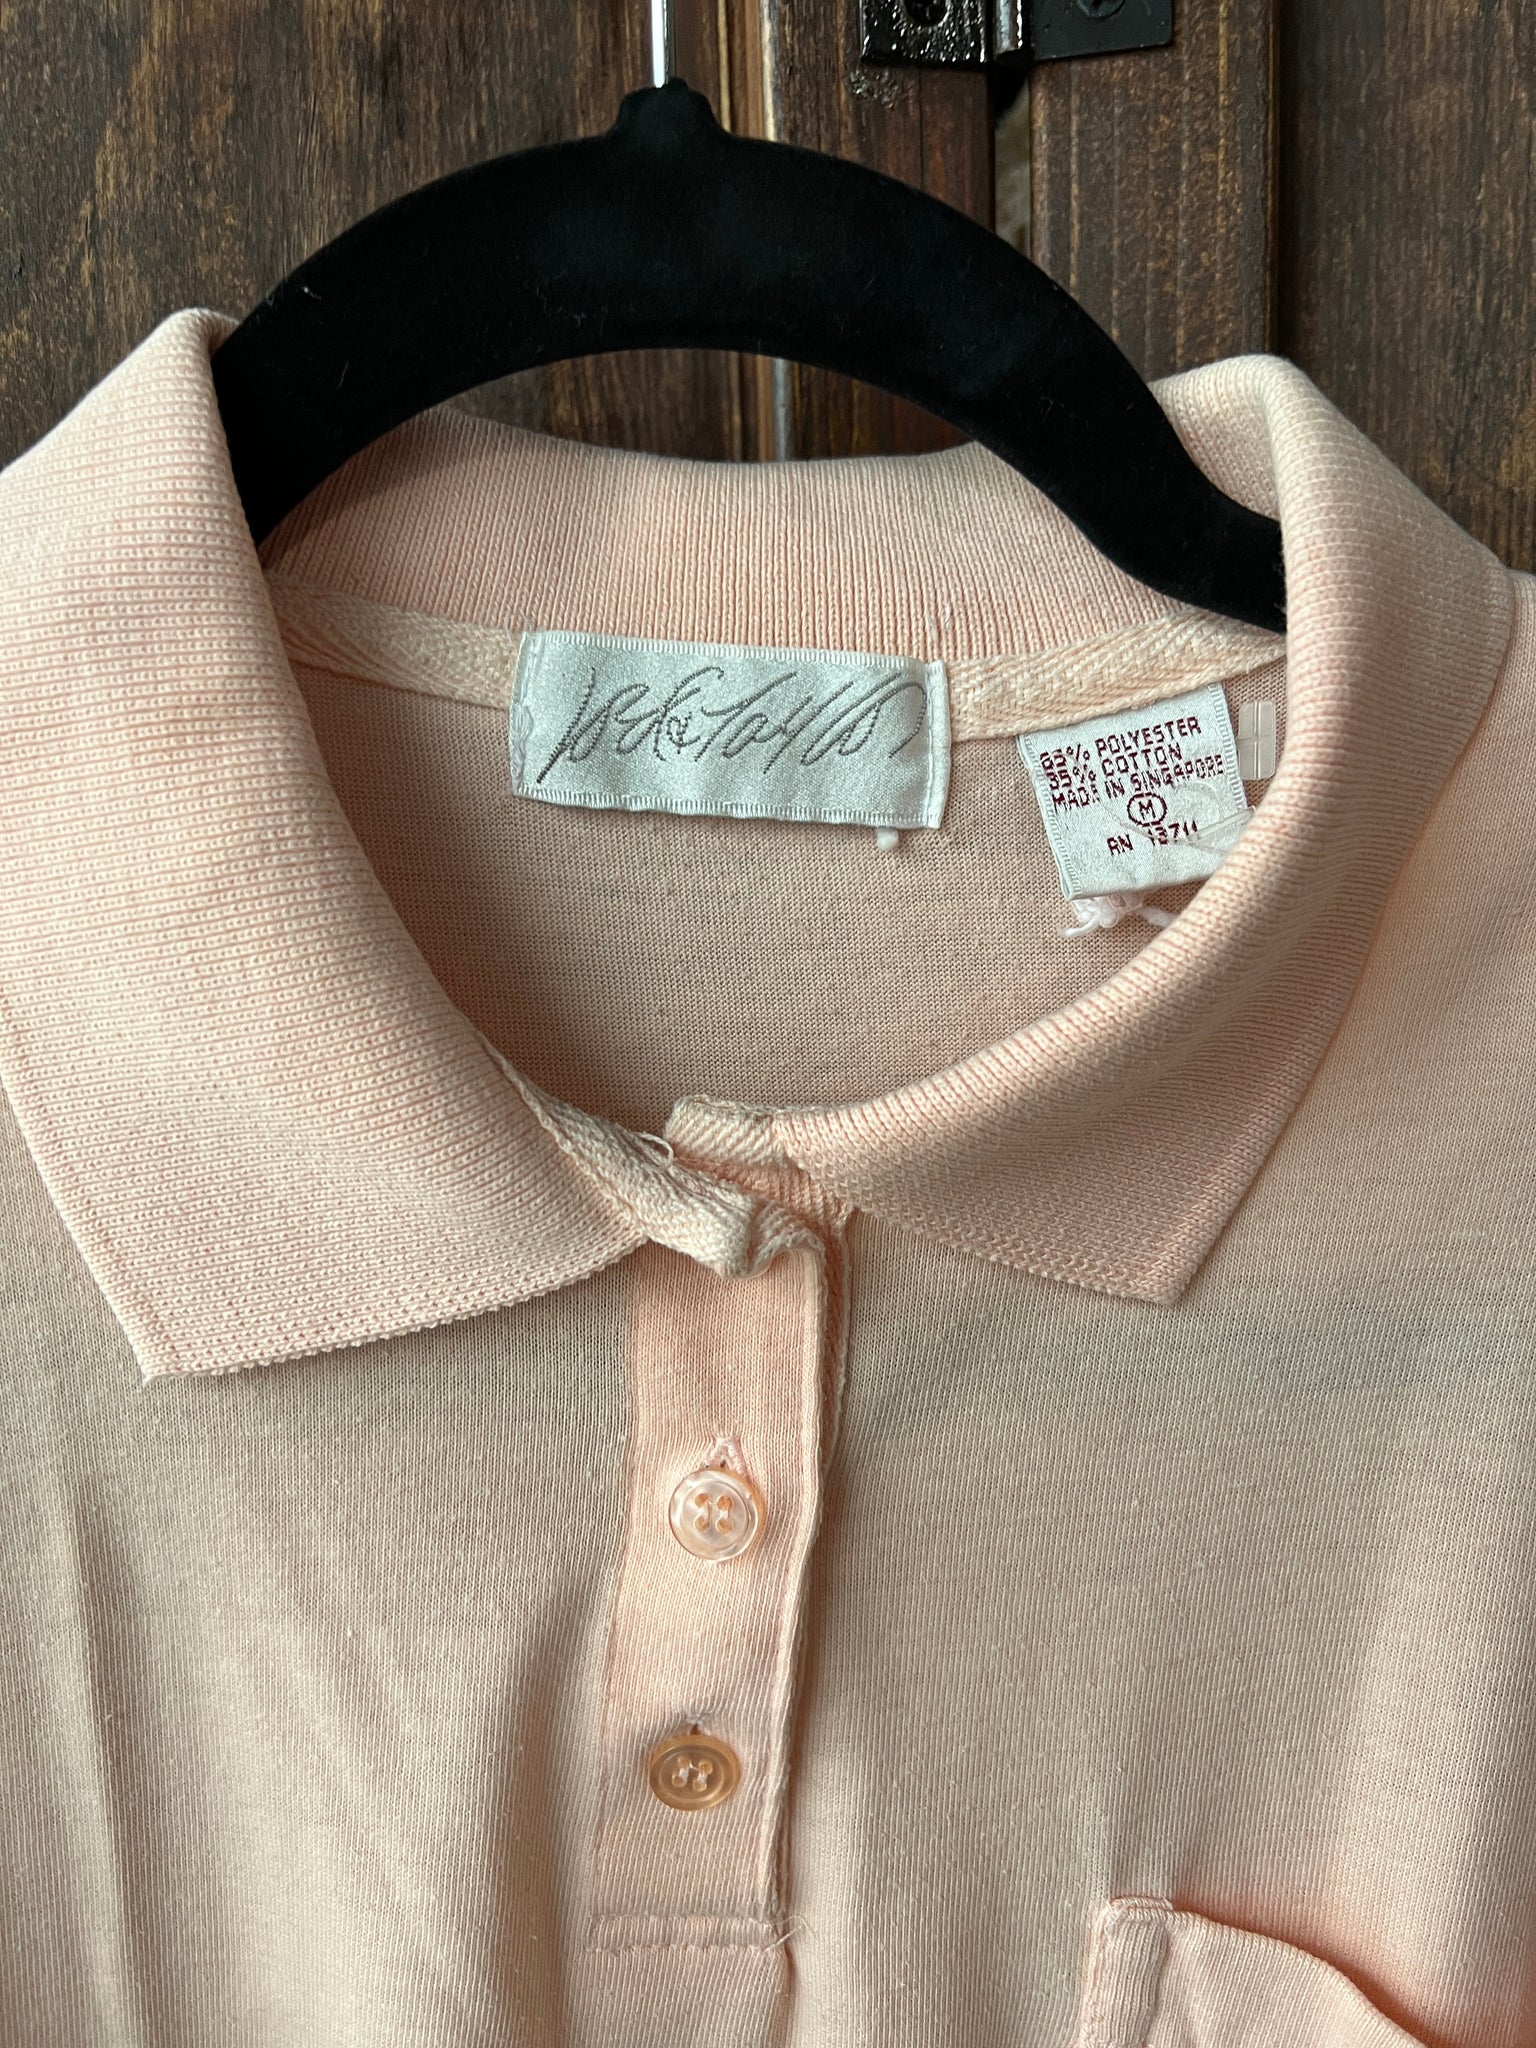 1980s TOPS- Lord & Taylor peach banded polo